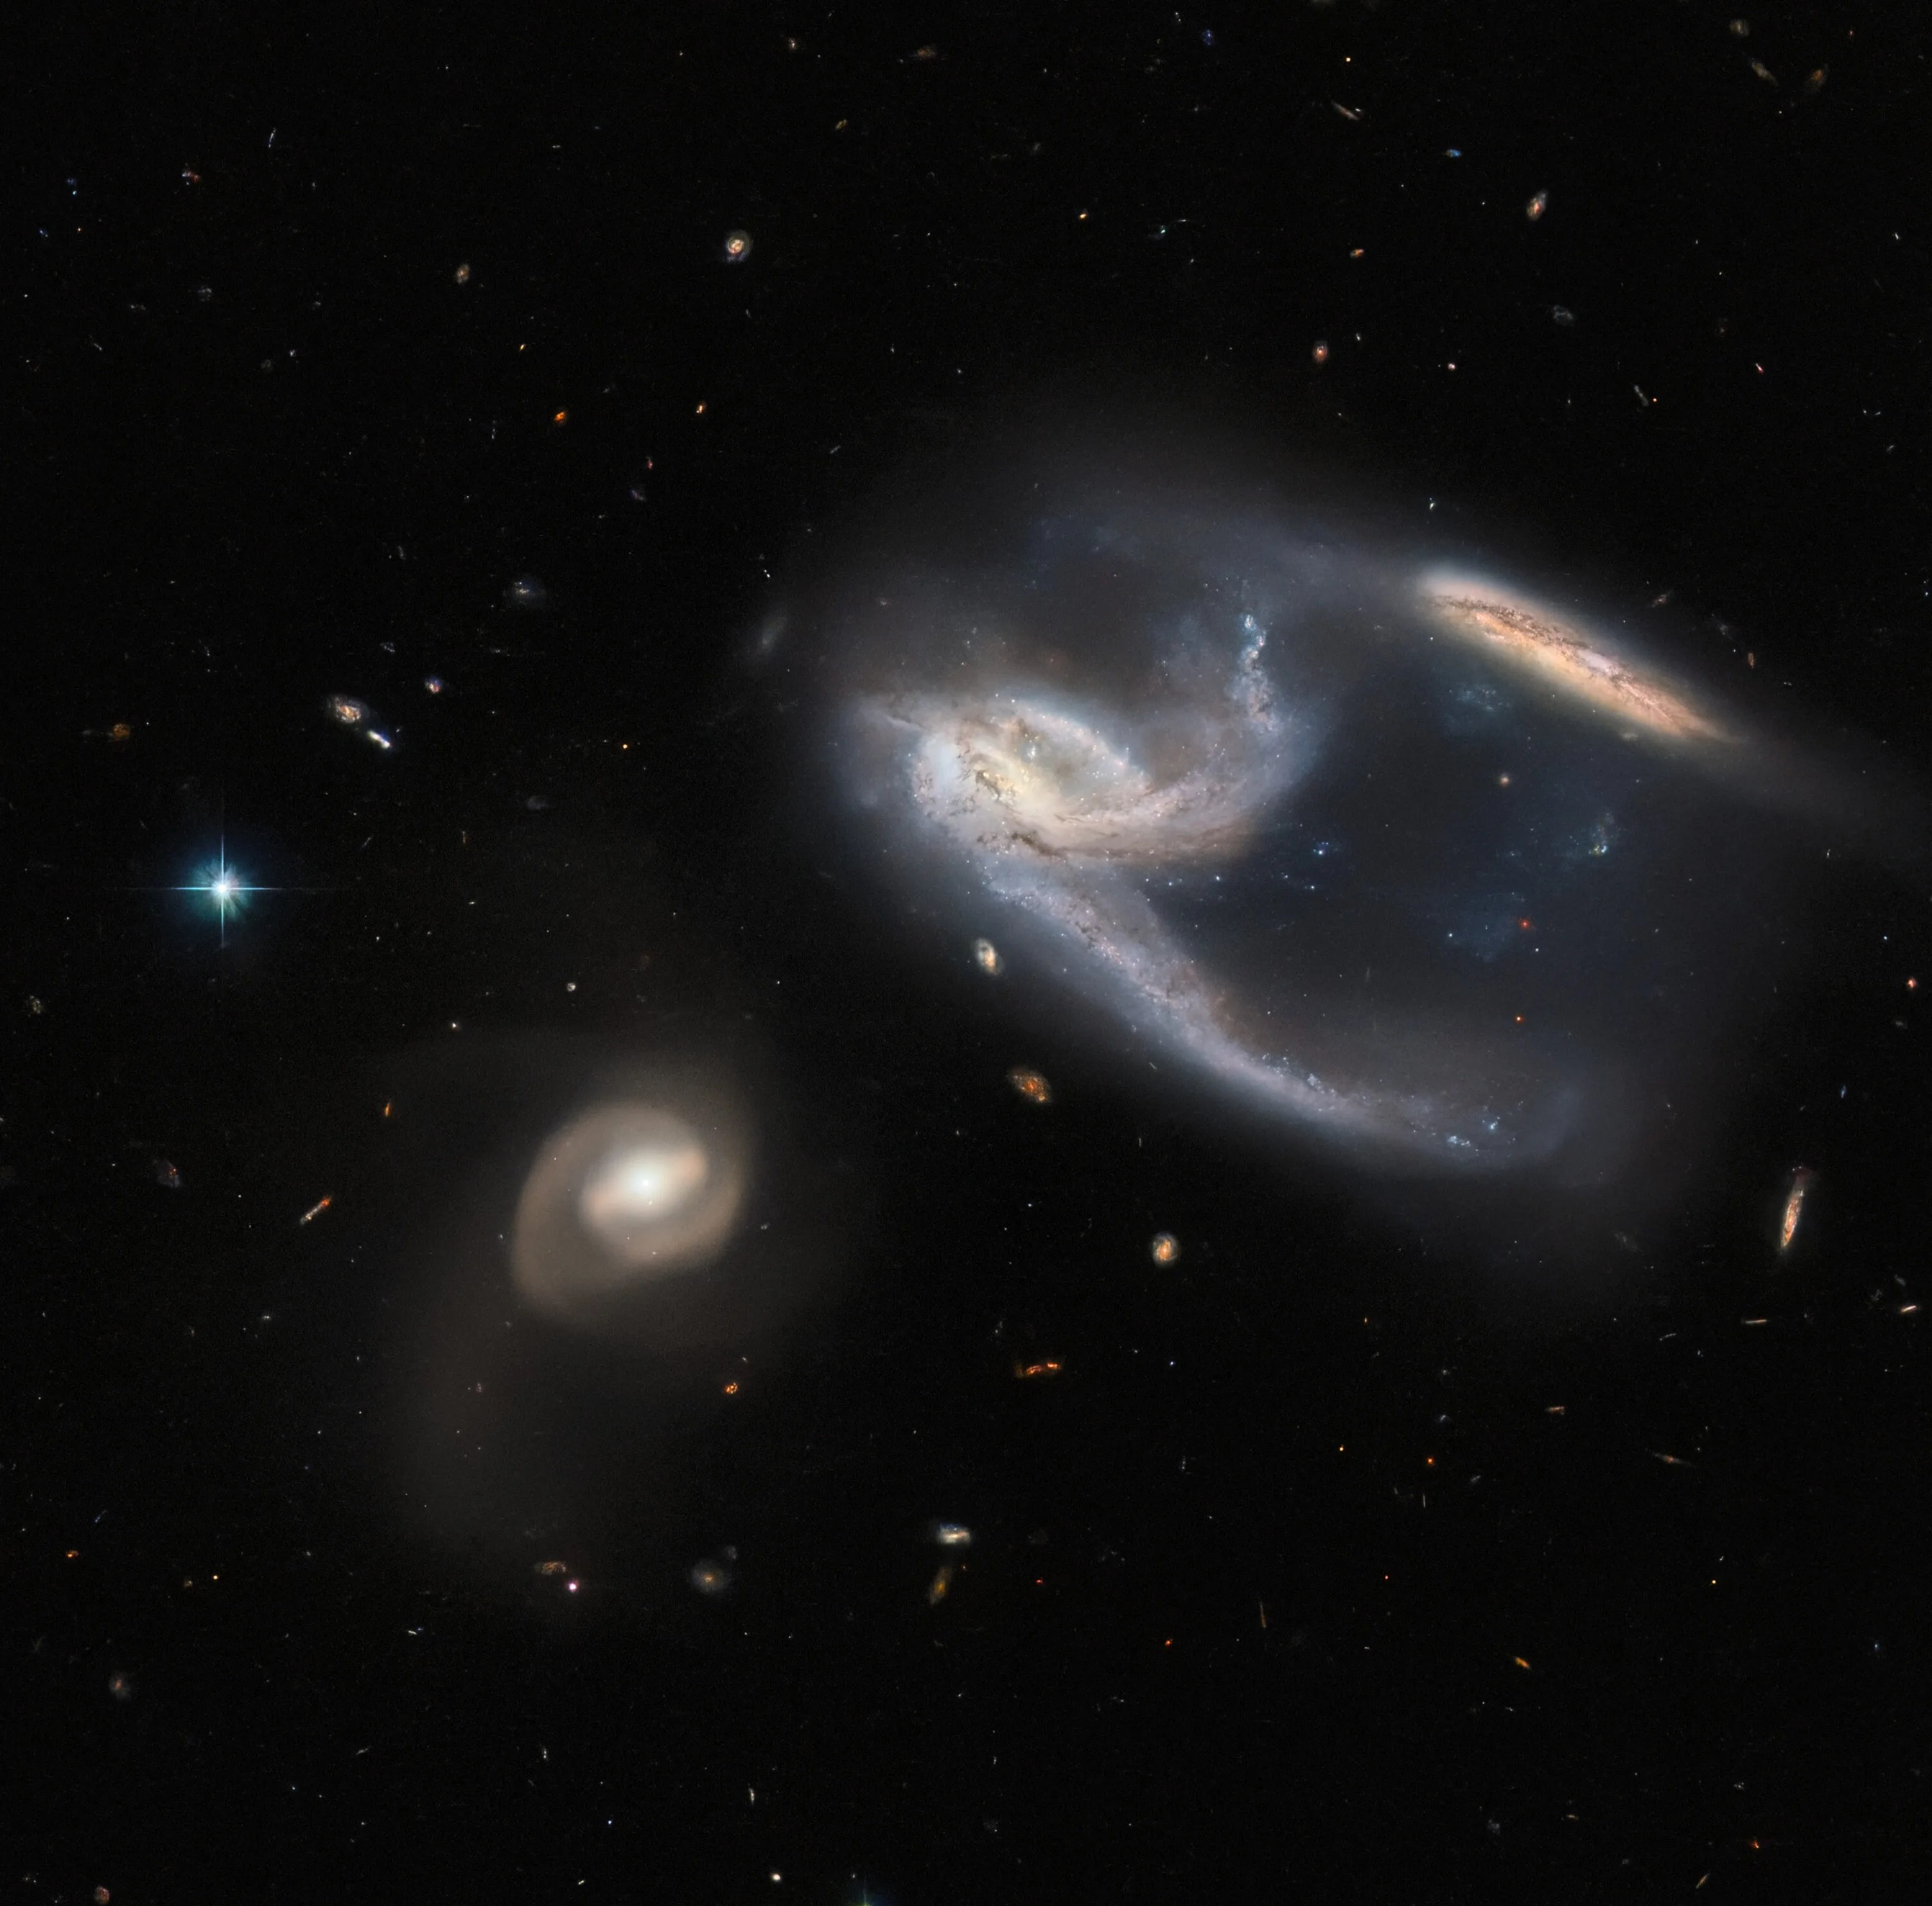 Three  galaxies, the center one holds two extended arms, one of which appears to connect to a galaxy at upper right.